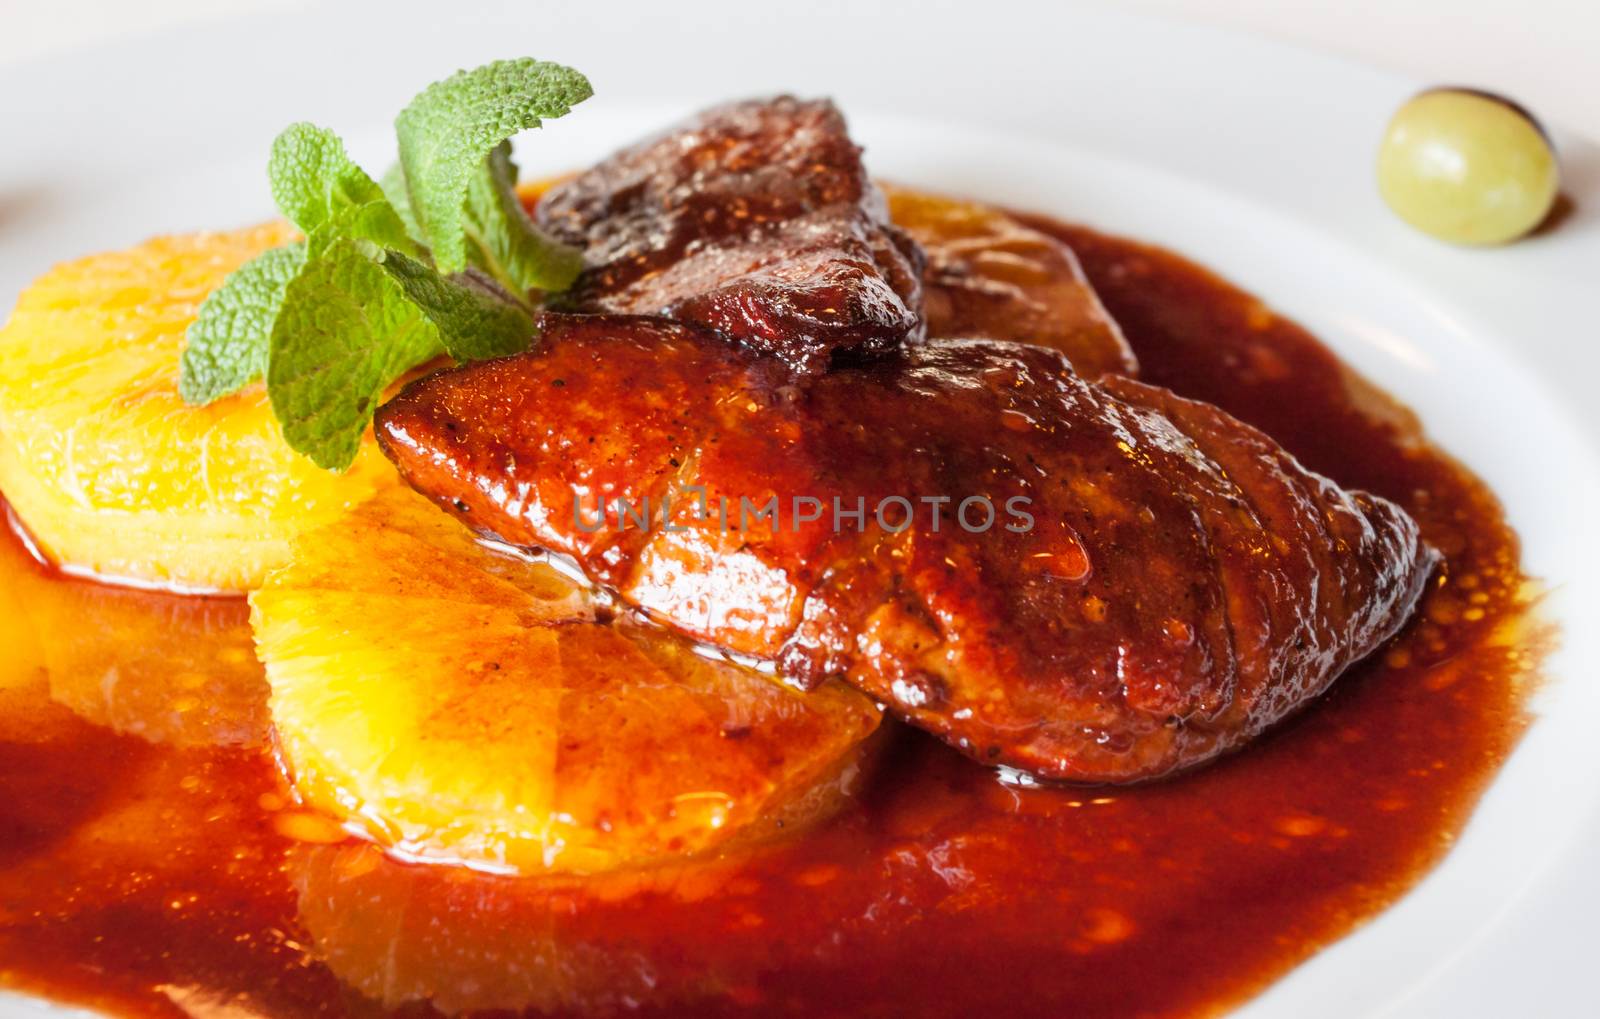 Luxuriously served roasted goose liver over orange slices with sauce and fresh mint meal.